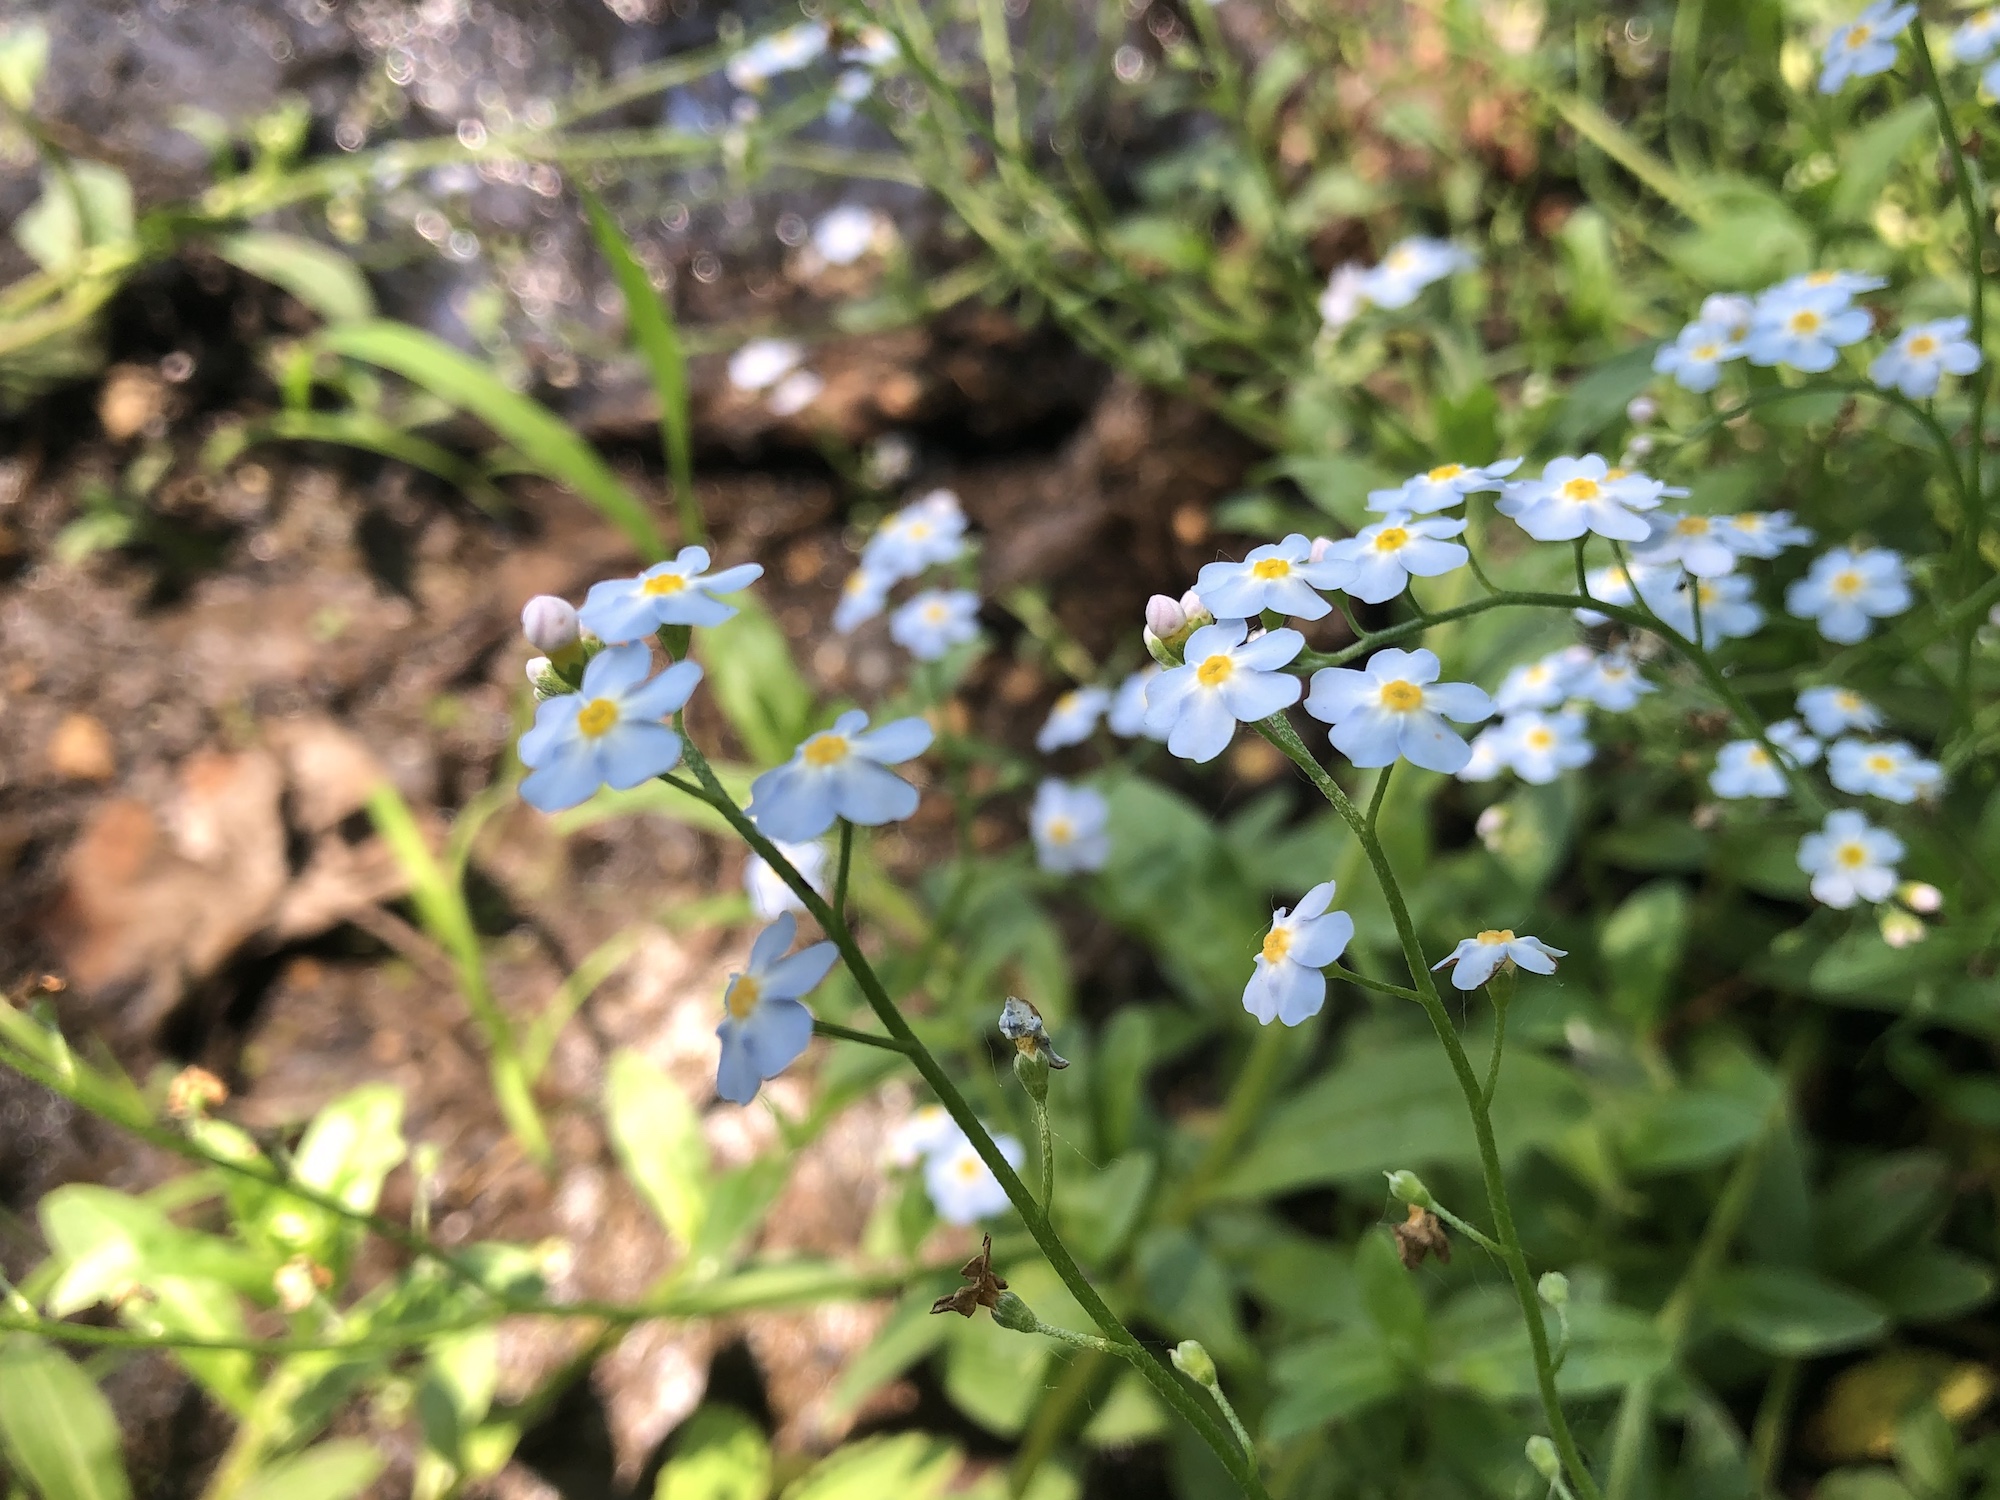 True Forget-me-not in Ho-Nee-Un Pond in Madison, Wisconsin on June 3, 2021.